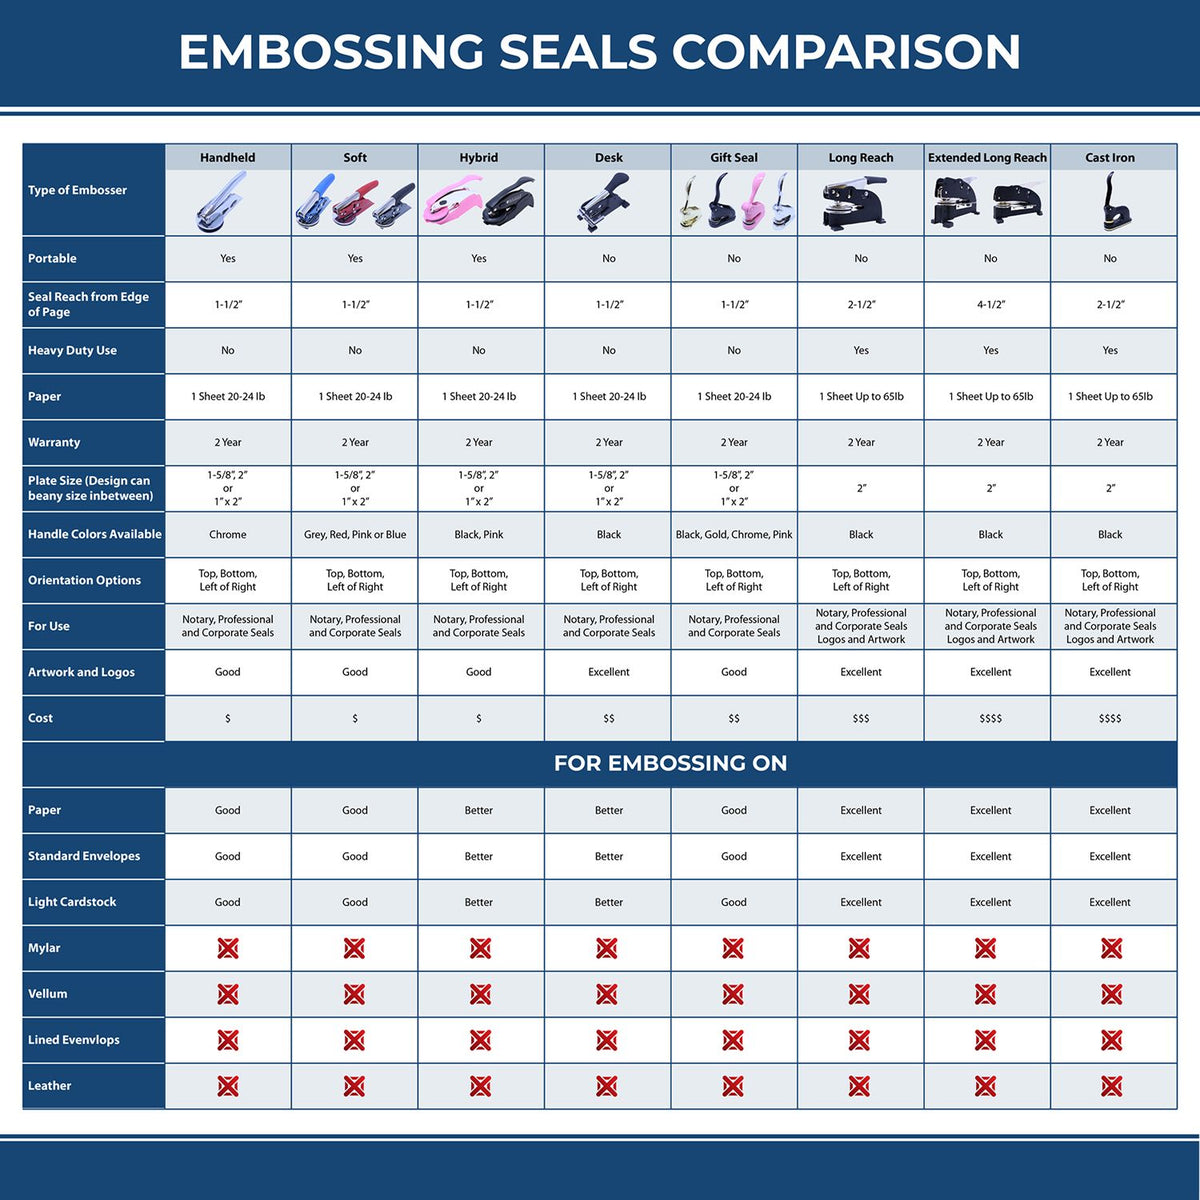 A comparison chart for the different types of mount models available for the Long Reach Delaware PE Seal.